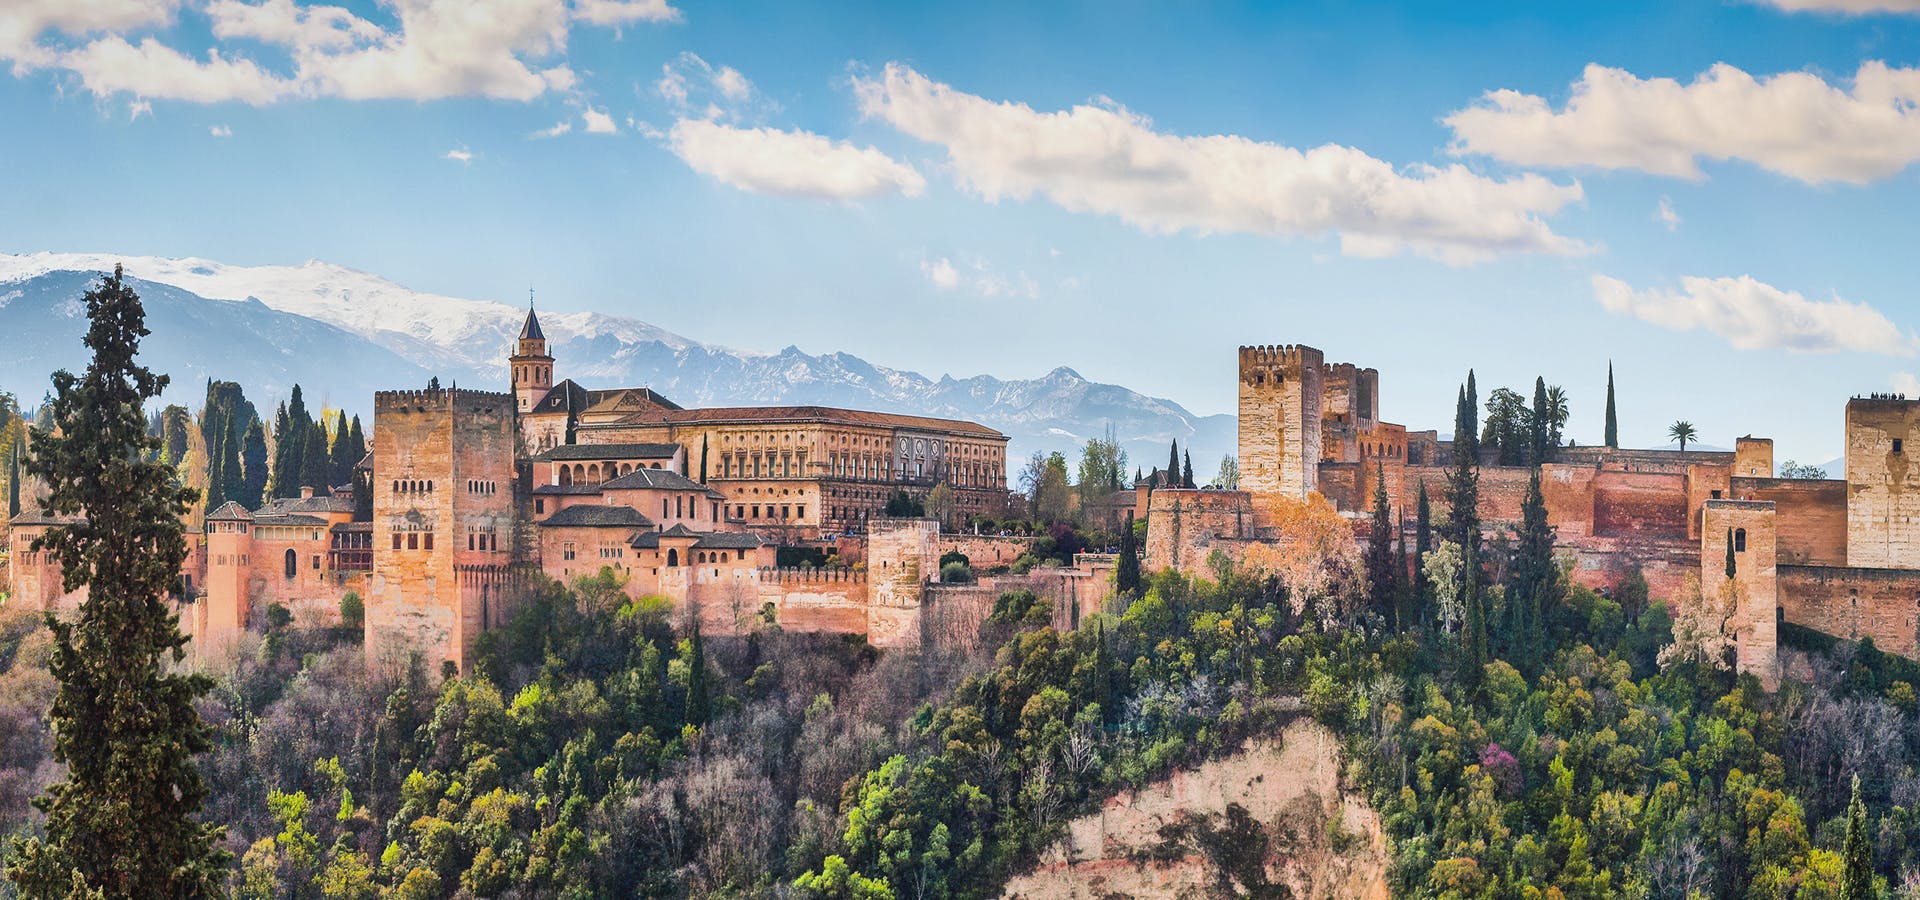 Tour with tickets included to the entire Alhambra